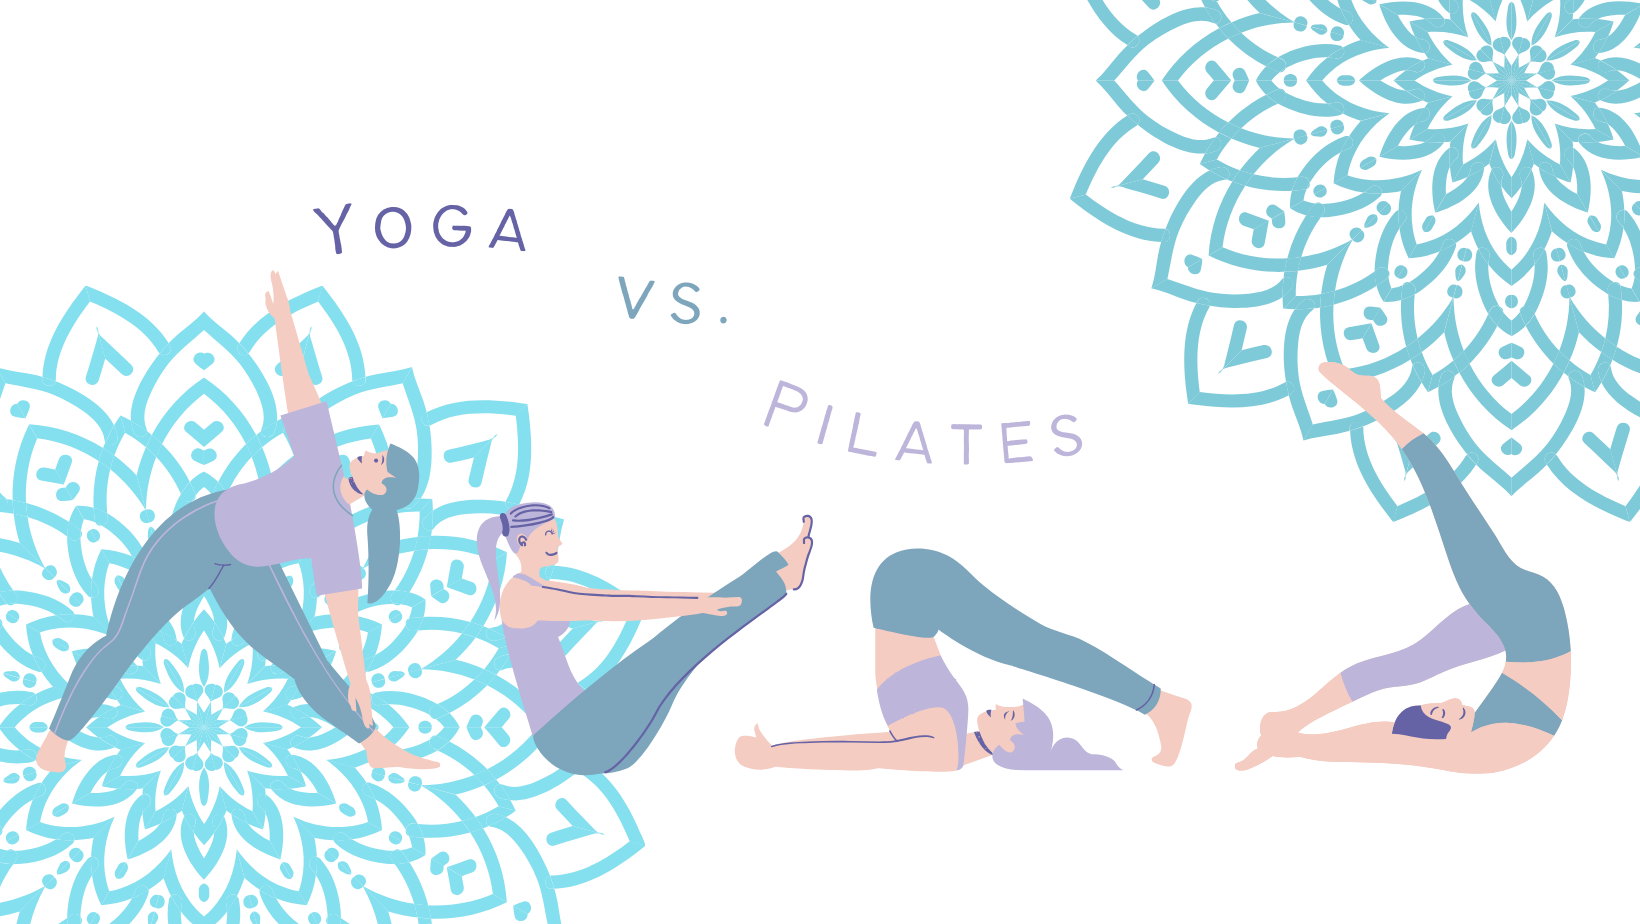 differences between Yoga vs. Pilates